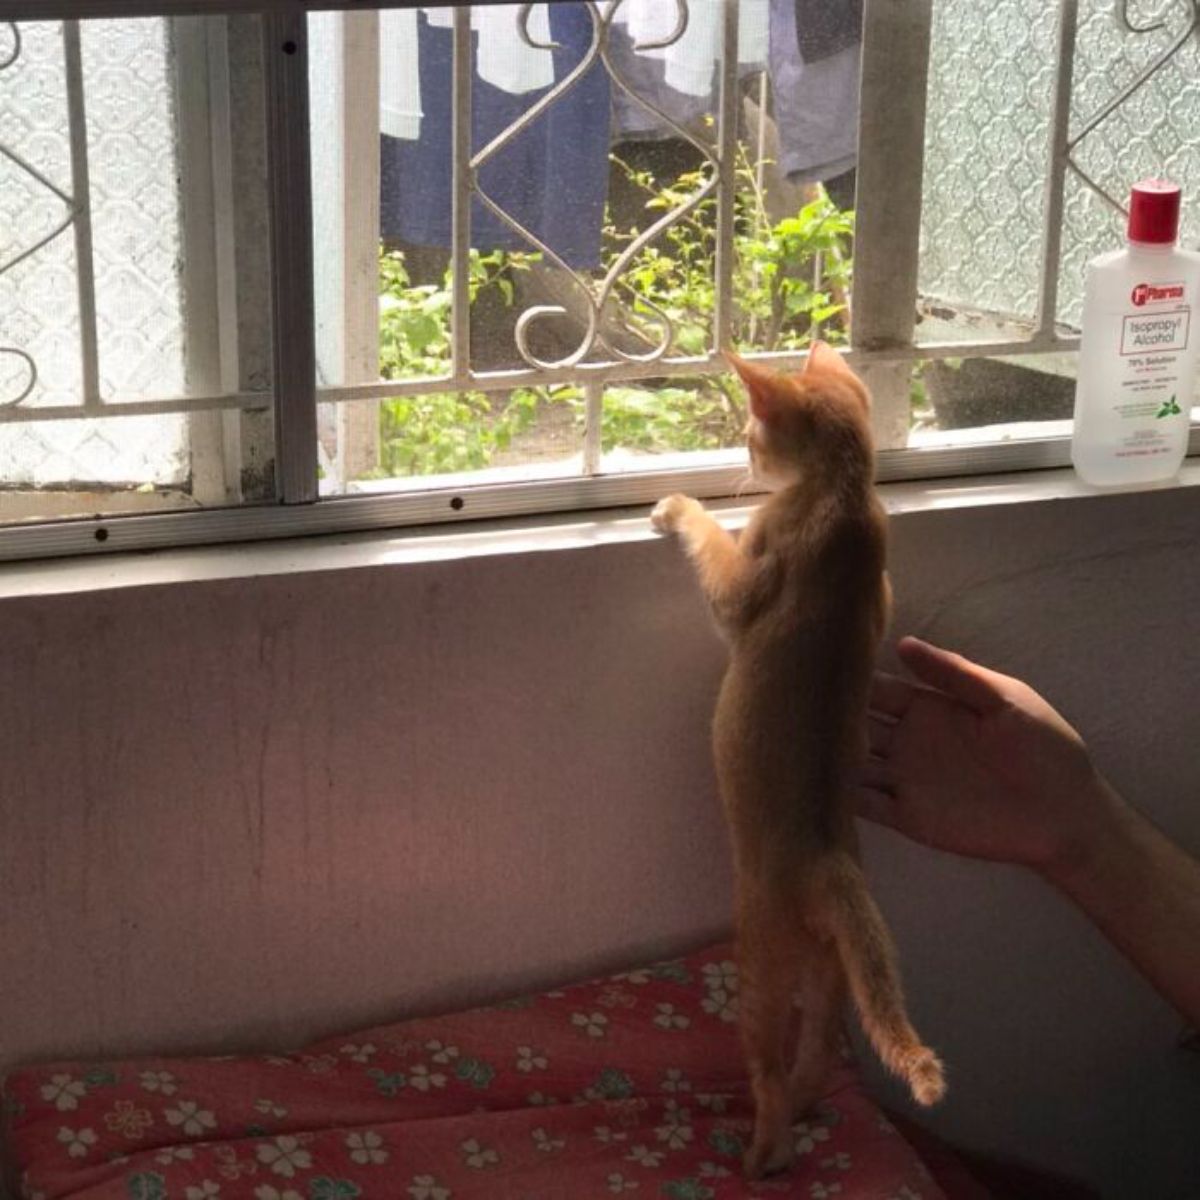 orange kitten standing on hind legs on a red and white bed looking out of a window with someone putting a hand on the kitten's right side